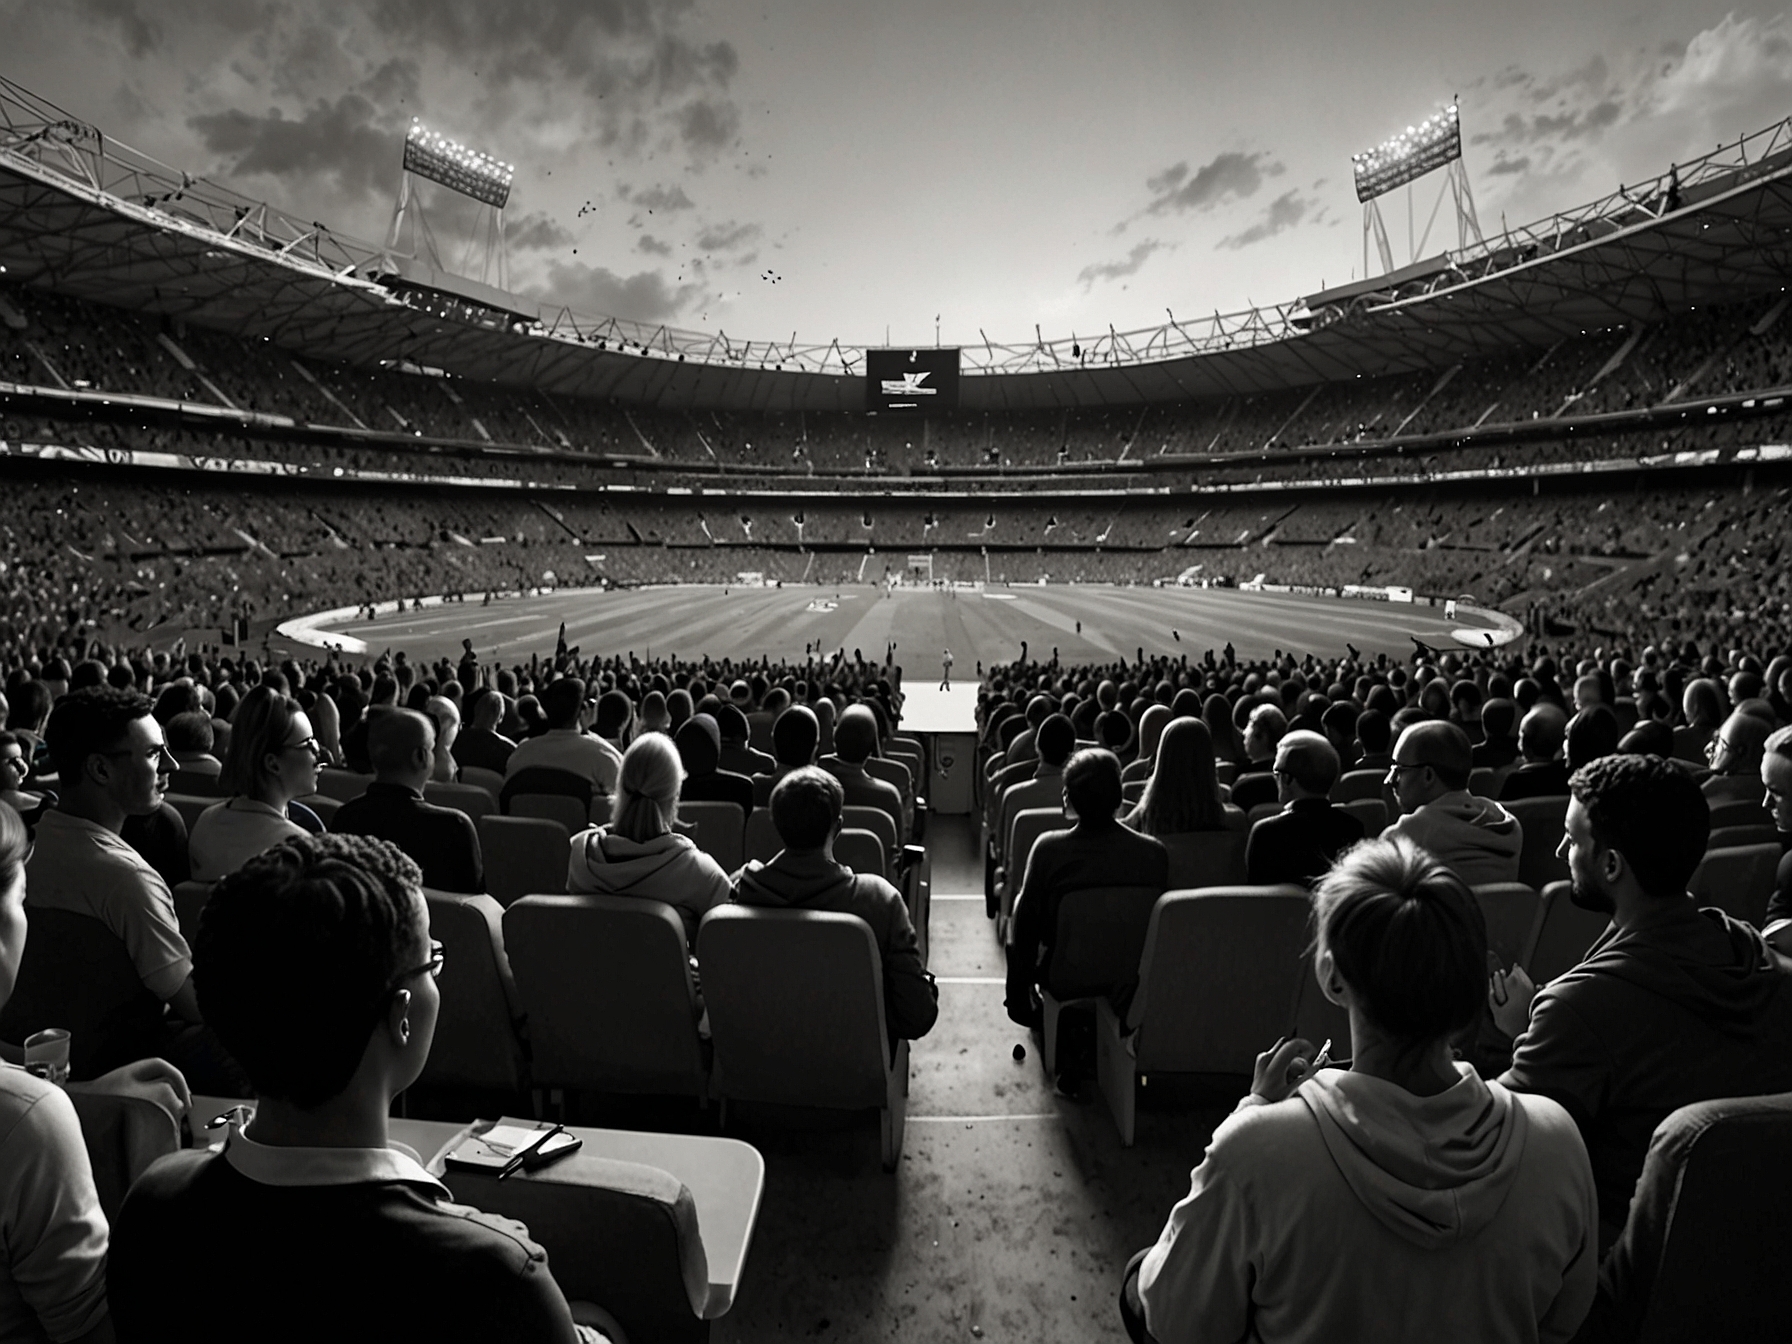 A wide-angle shot of Wembley Stadium filled with fans listening intently to Raye's powerful speech on sexual violence, capturing the emotional atmosphere and the gravity of the moment.